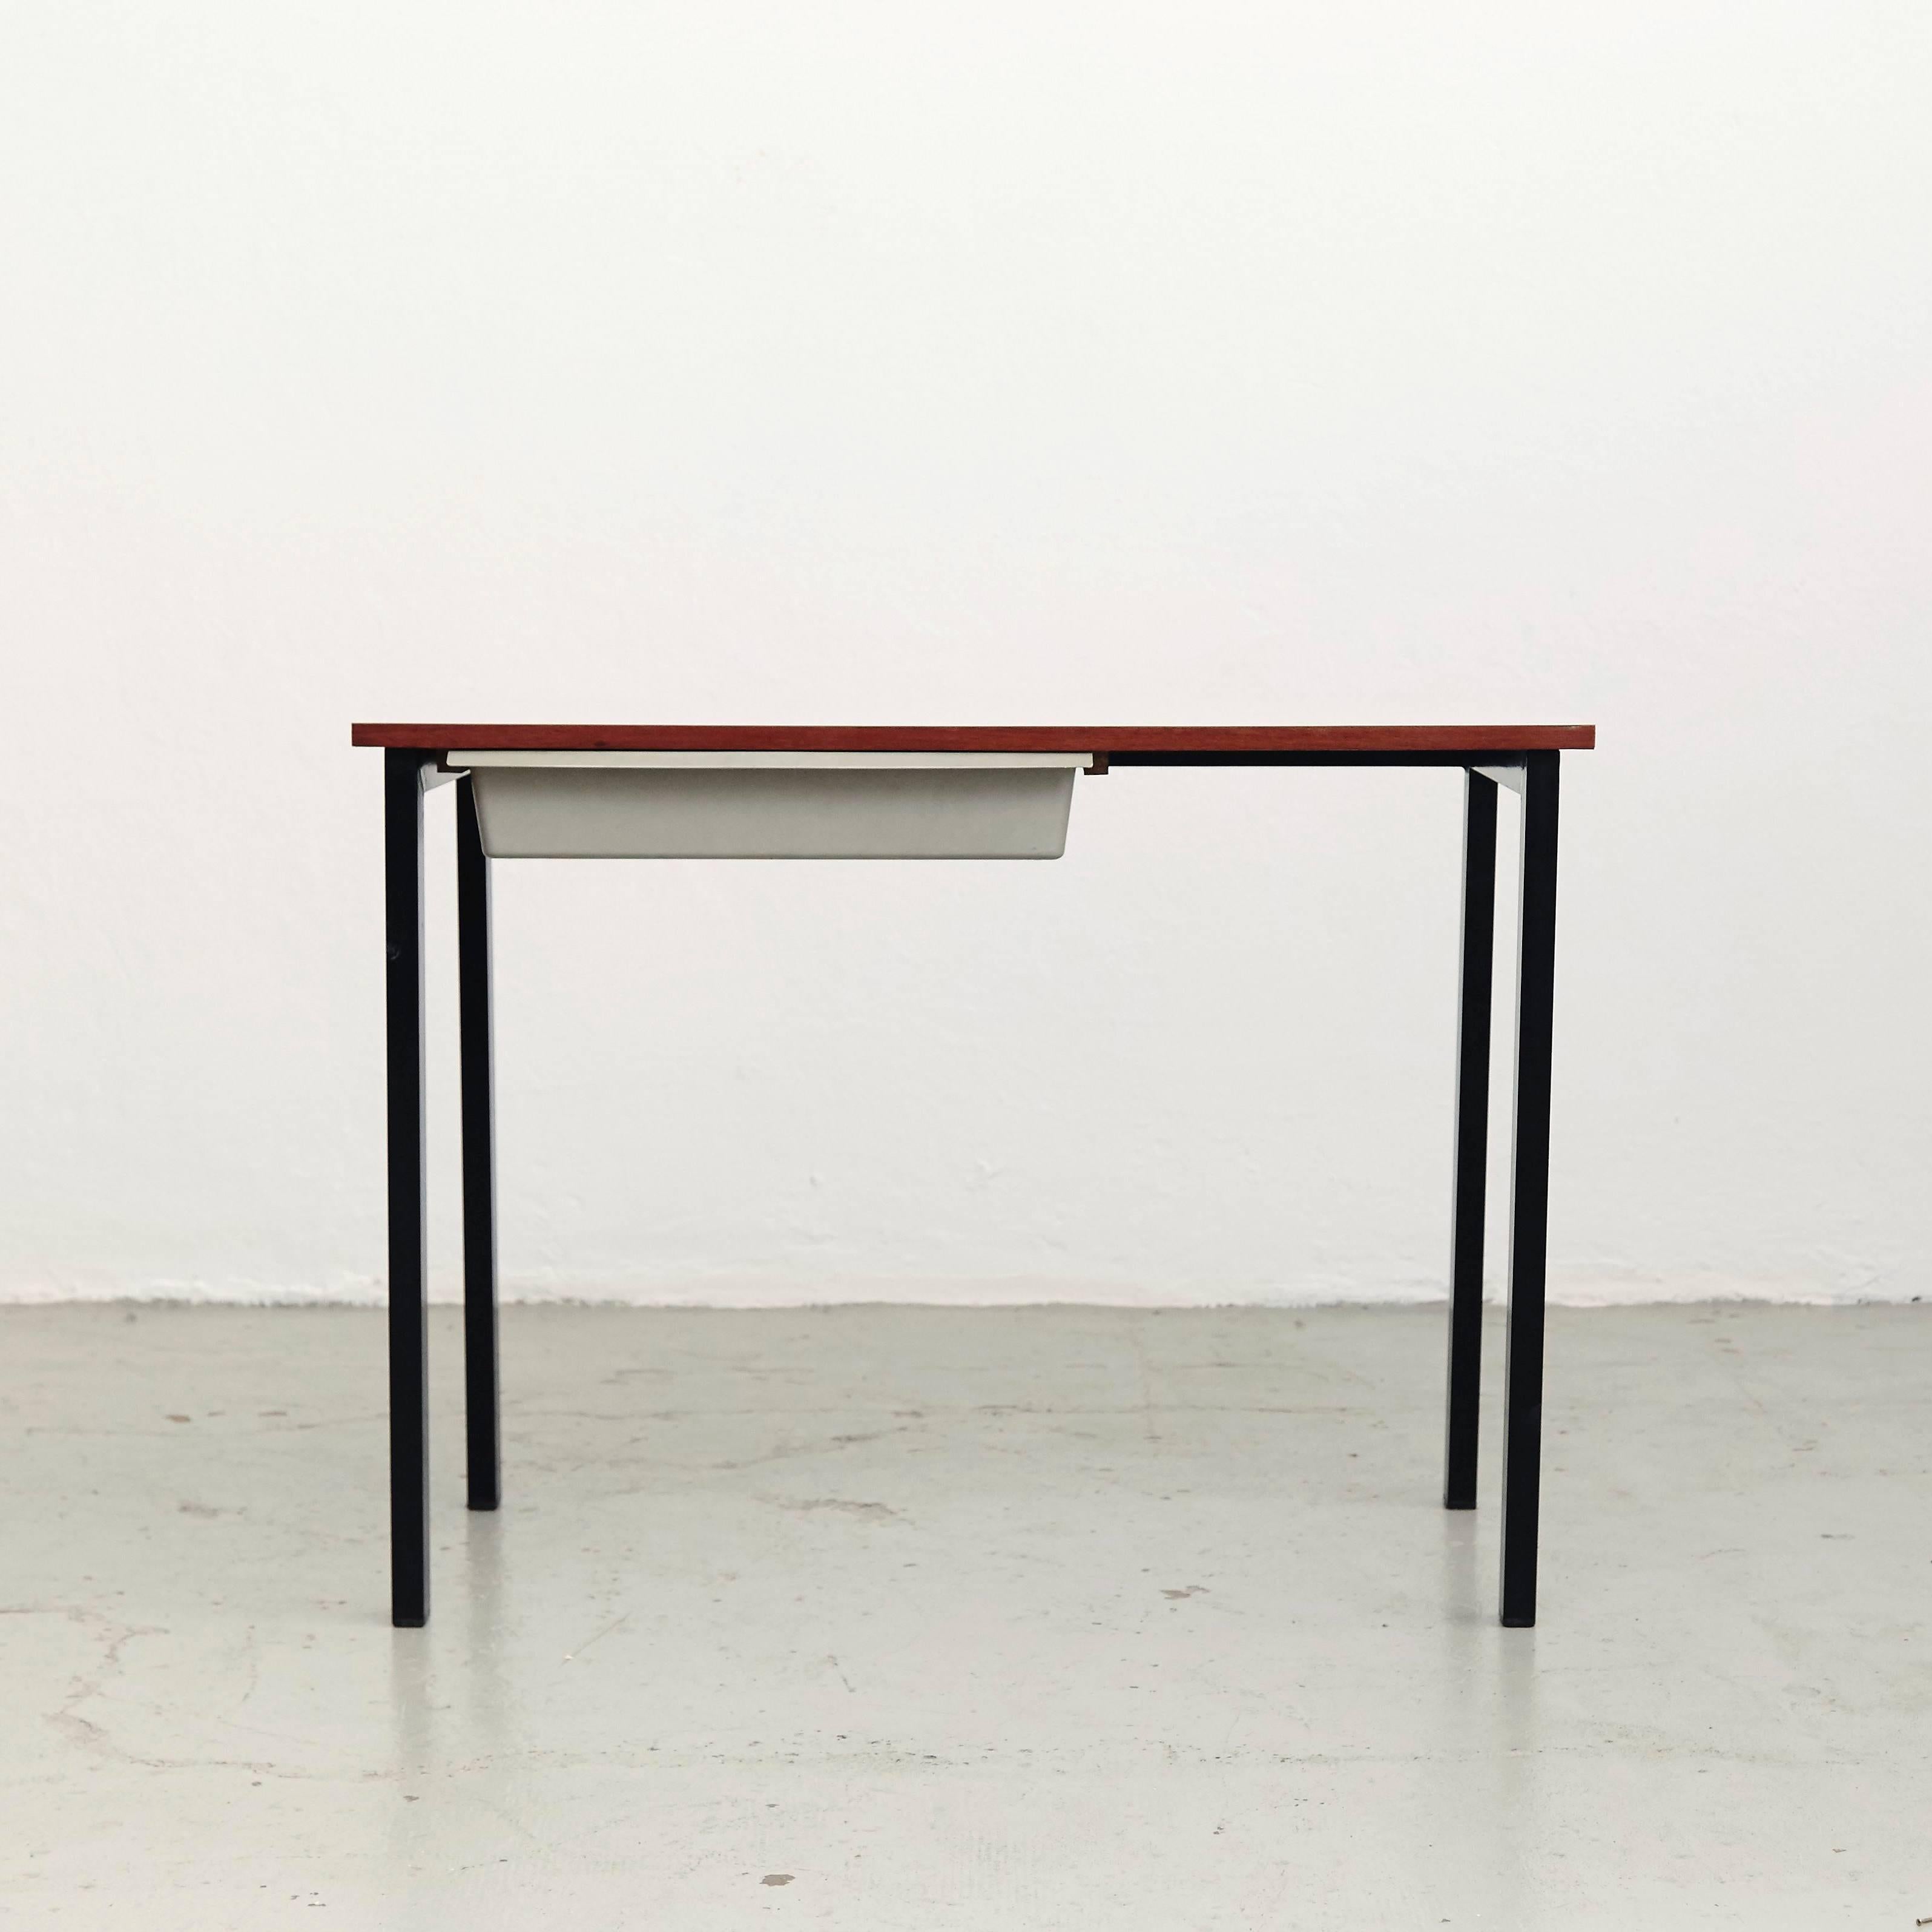 Console designed by Charlotte Perriand, circa 1958.
Manufactured in France, circa 1958.
Laminated plastic-covered plywood, painted steel and grey moulded plastic.

Drawer moulded with Modele Charlotte Perriand/Brevete S.G.D.G. 

In good